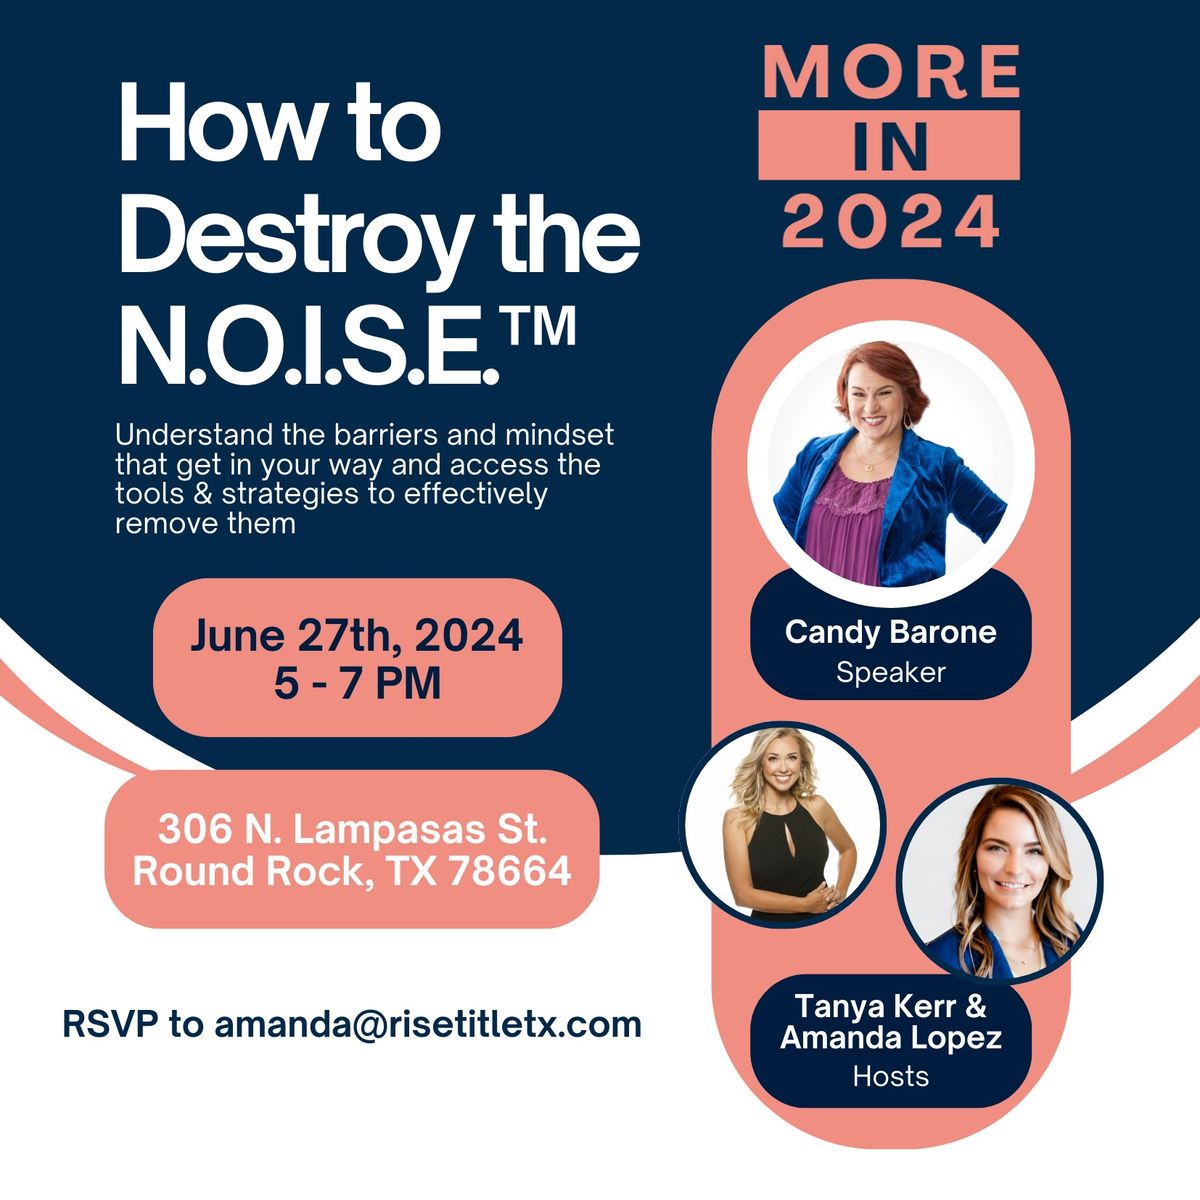 More in 2024: How to Destroy the N.O.I.S.E